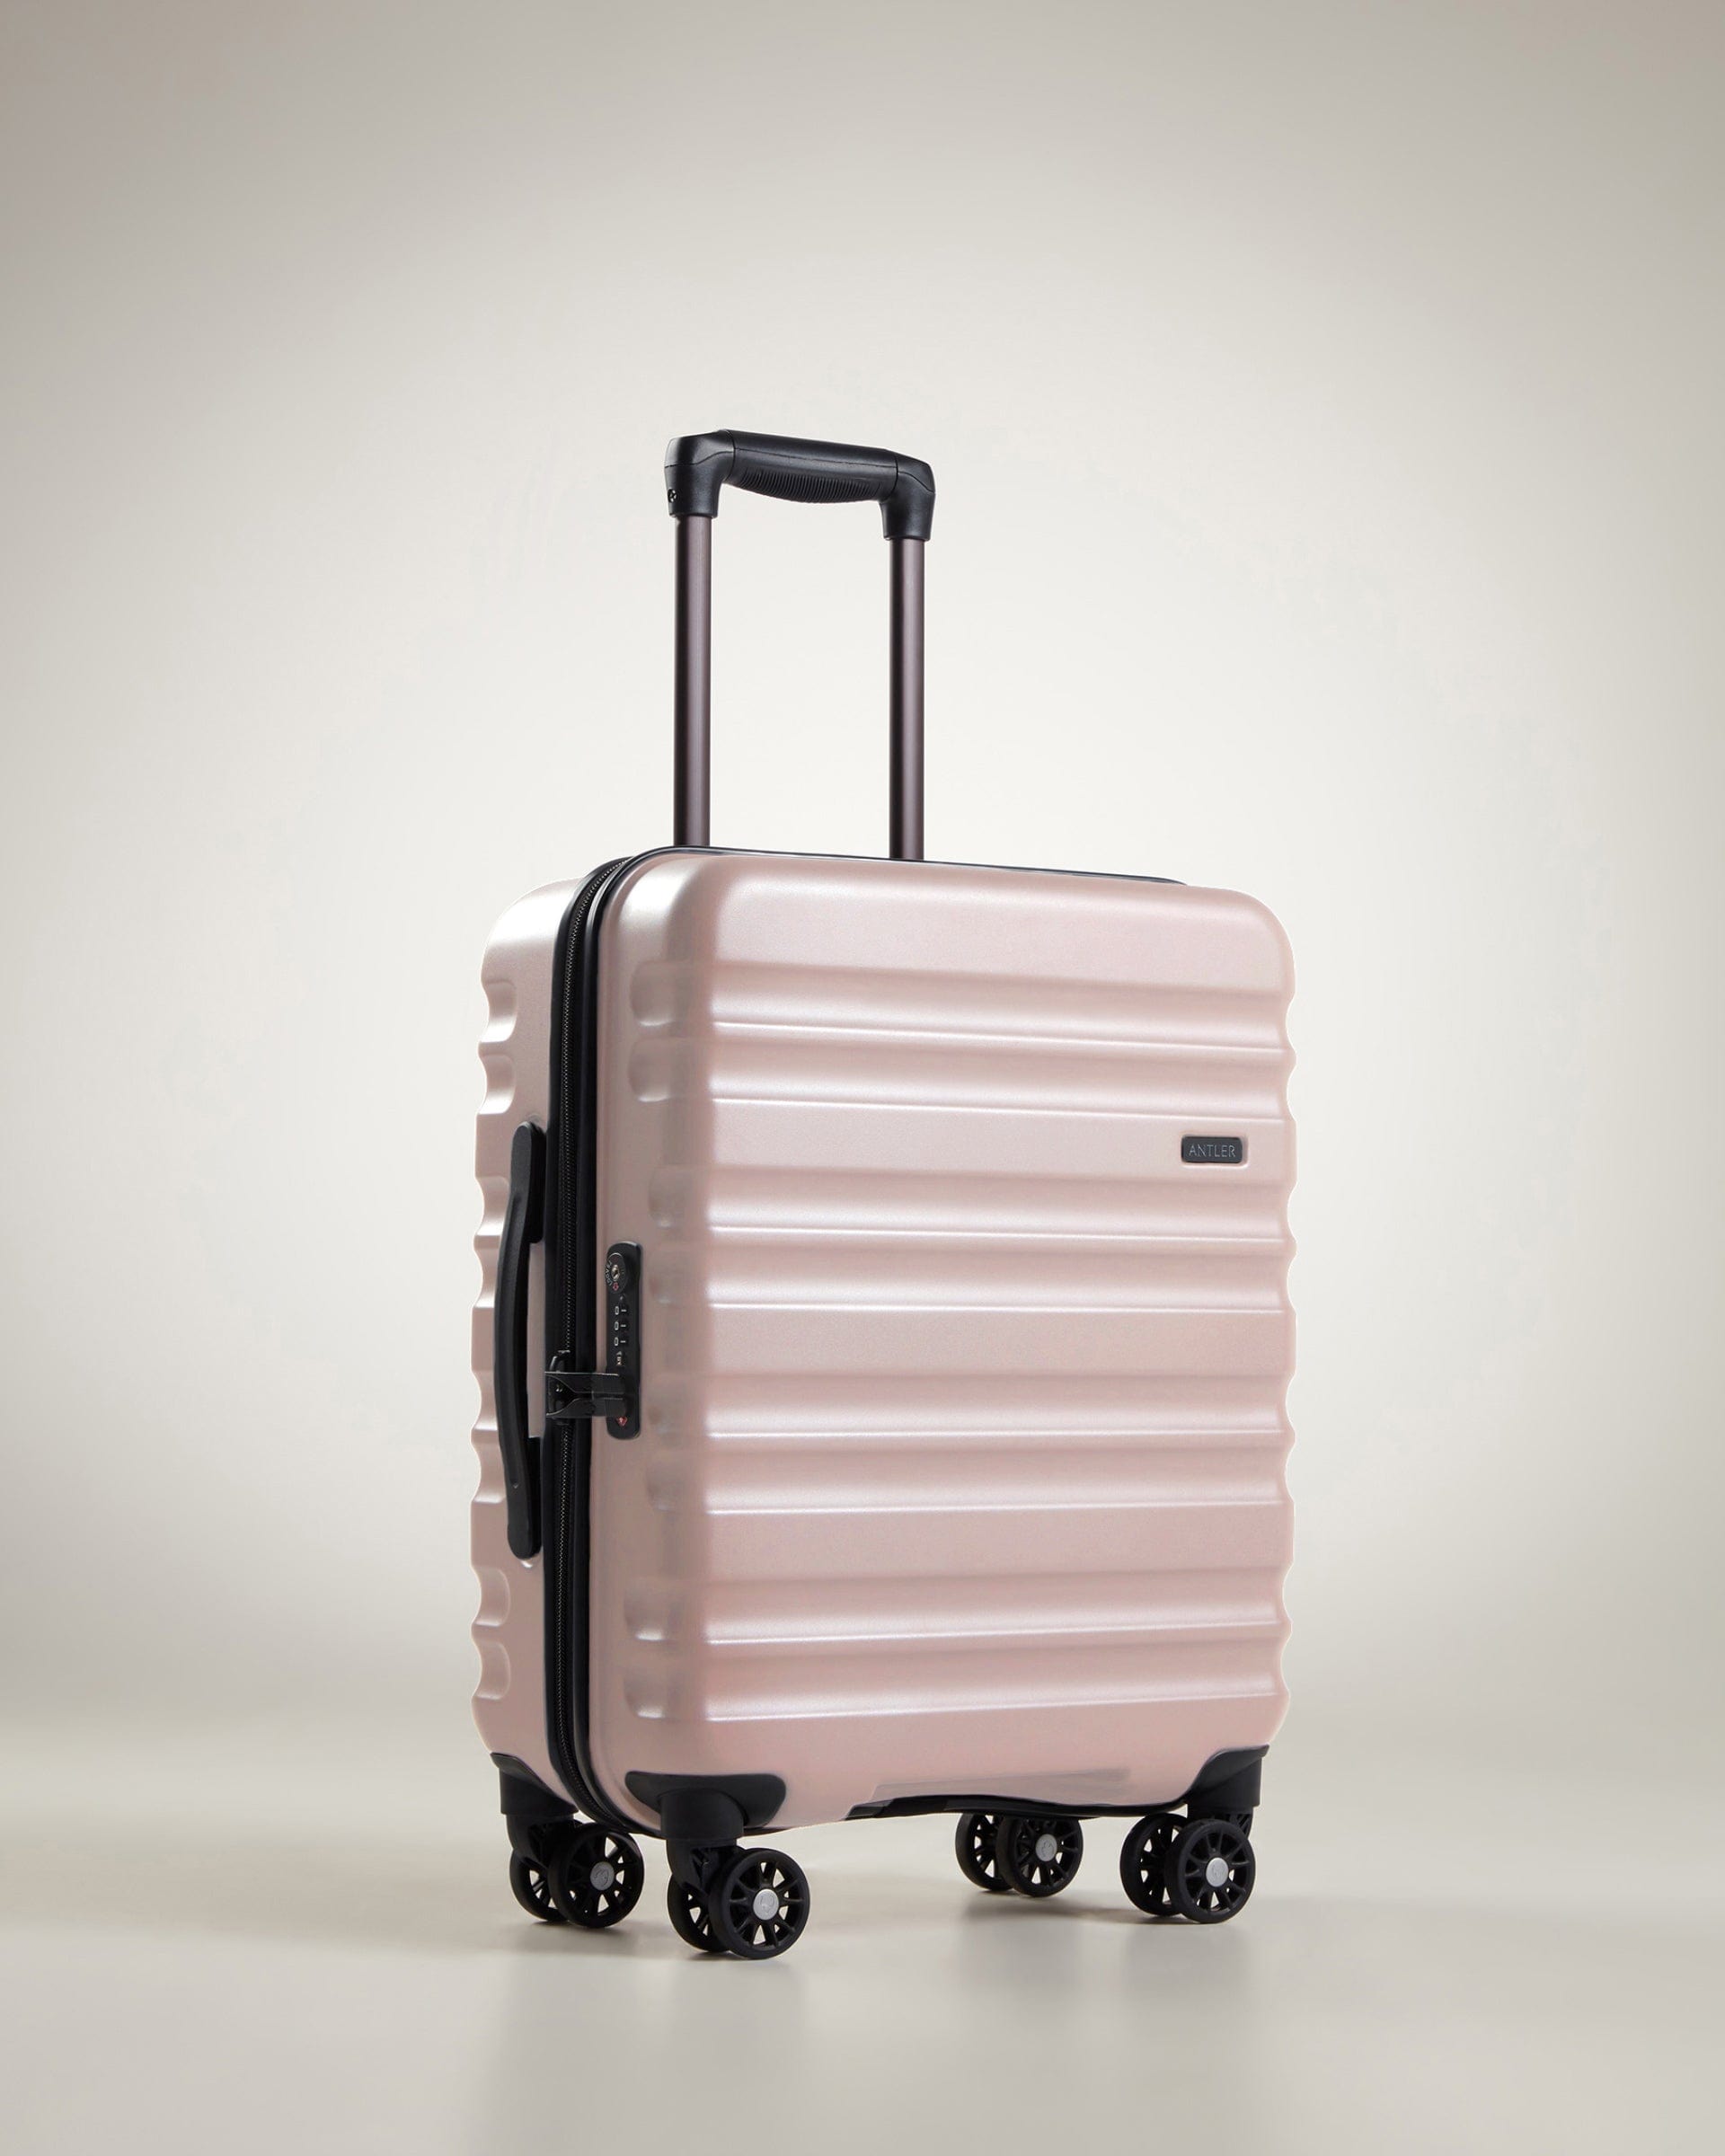 View Antler Clifton Expandable Cabin Suitcase In Blush Size 56 x 35 x 23 cm information